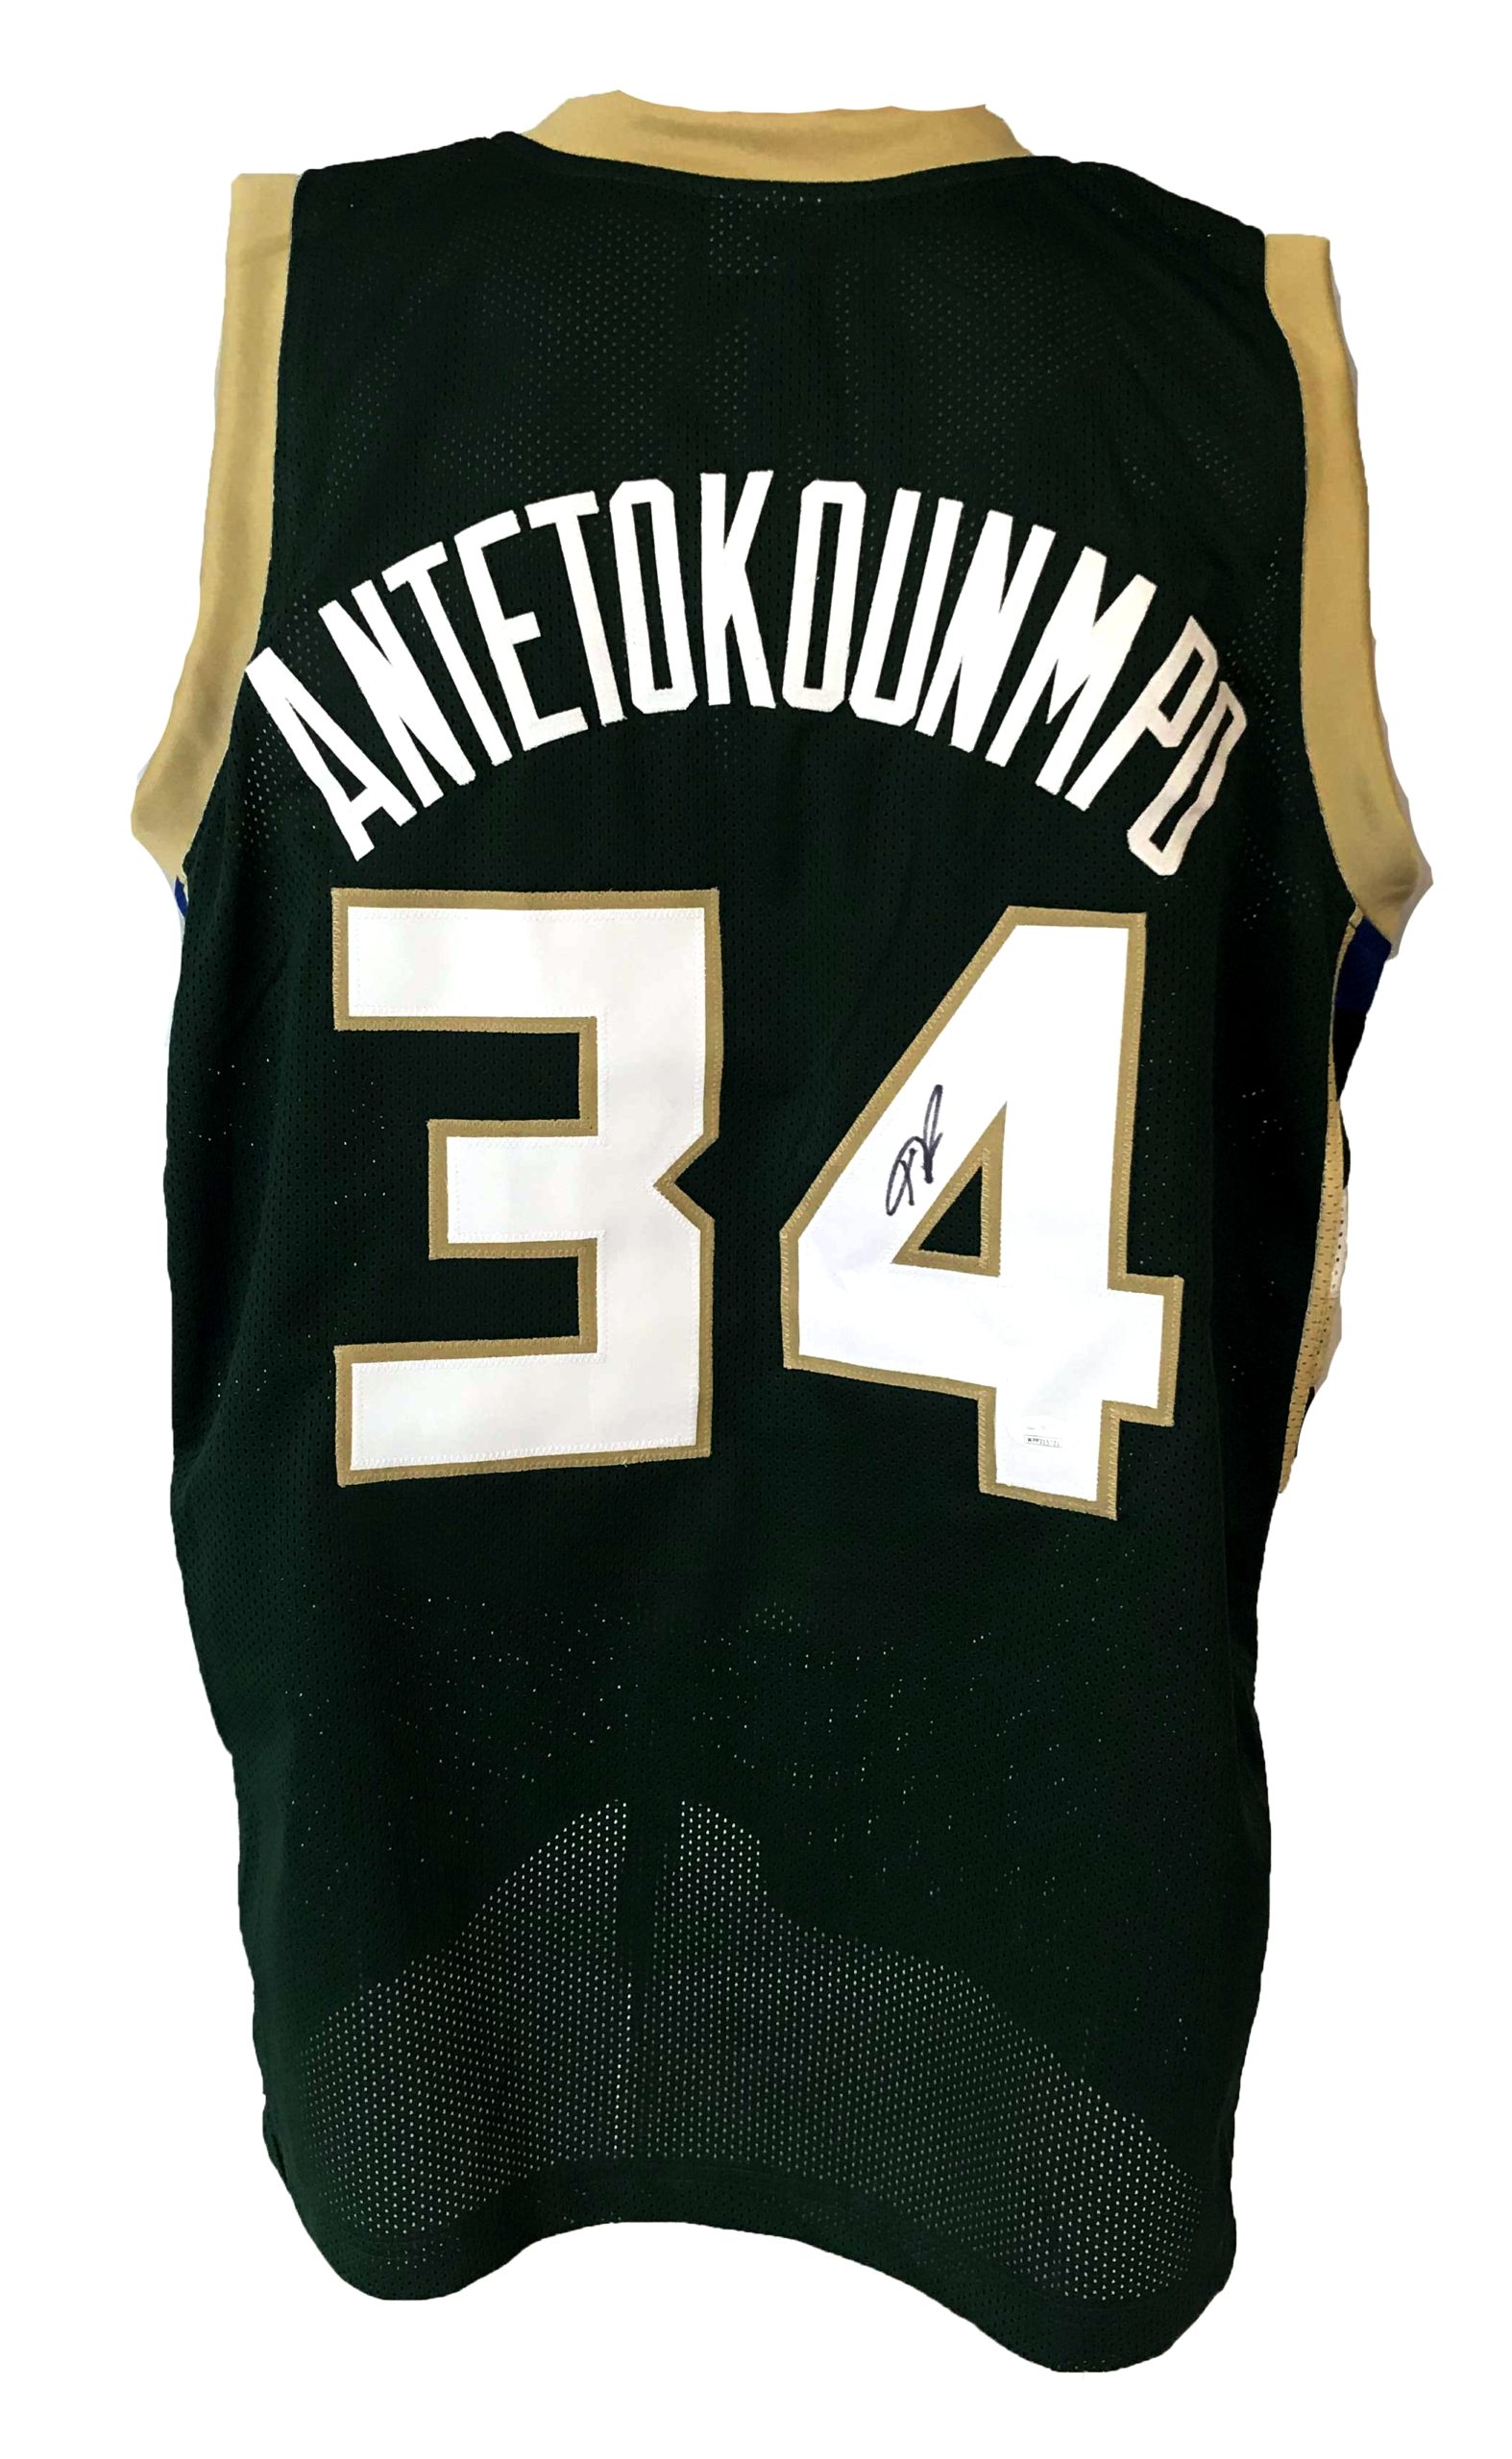 giannis antetokounmpo jersey signed